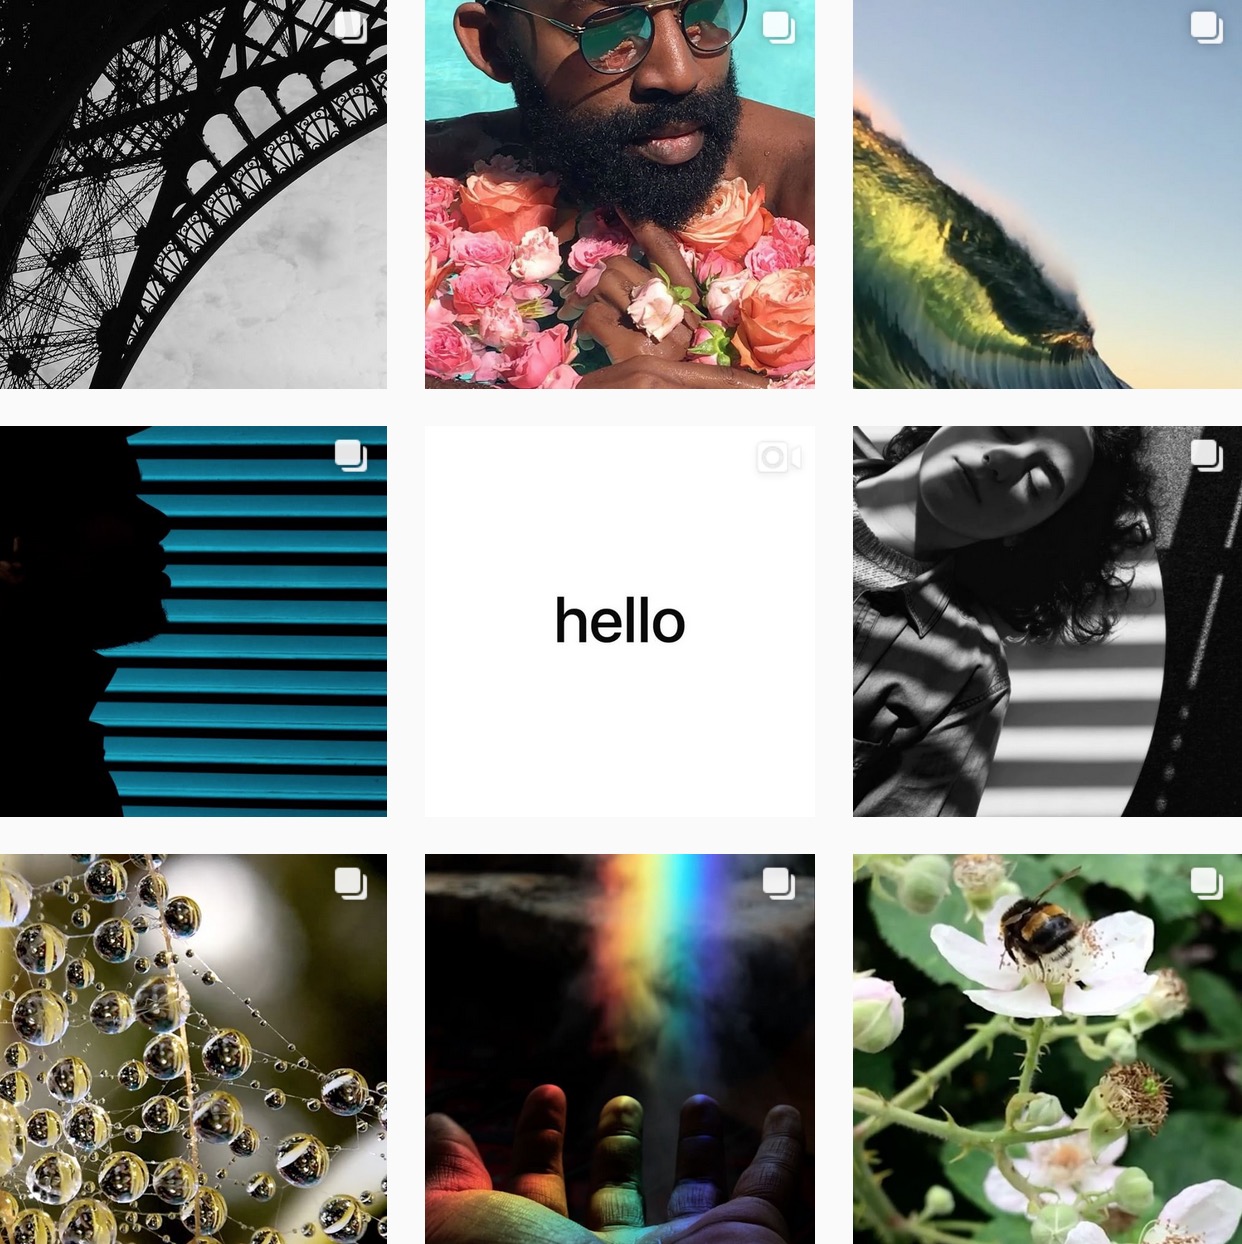 Apple Launches Instagram Account Featuring #ShotoniPhone Photos